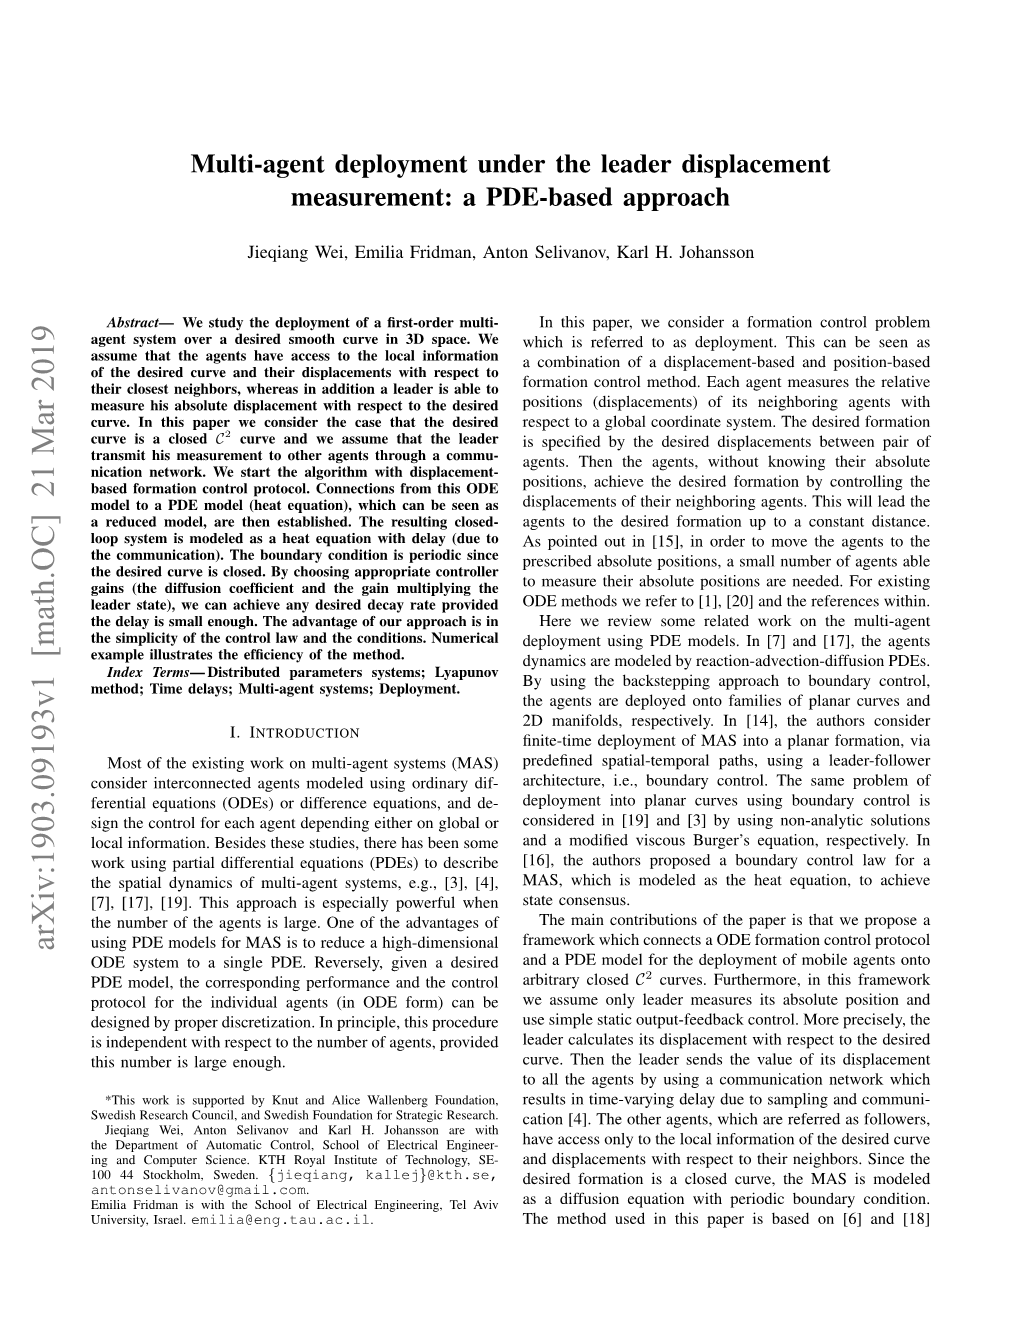 Multi-Agent Deployment Under the Leader Displacement Measurement: a PDE-Based Approach